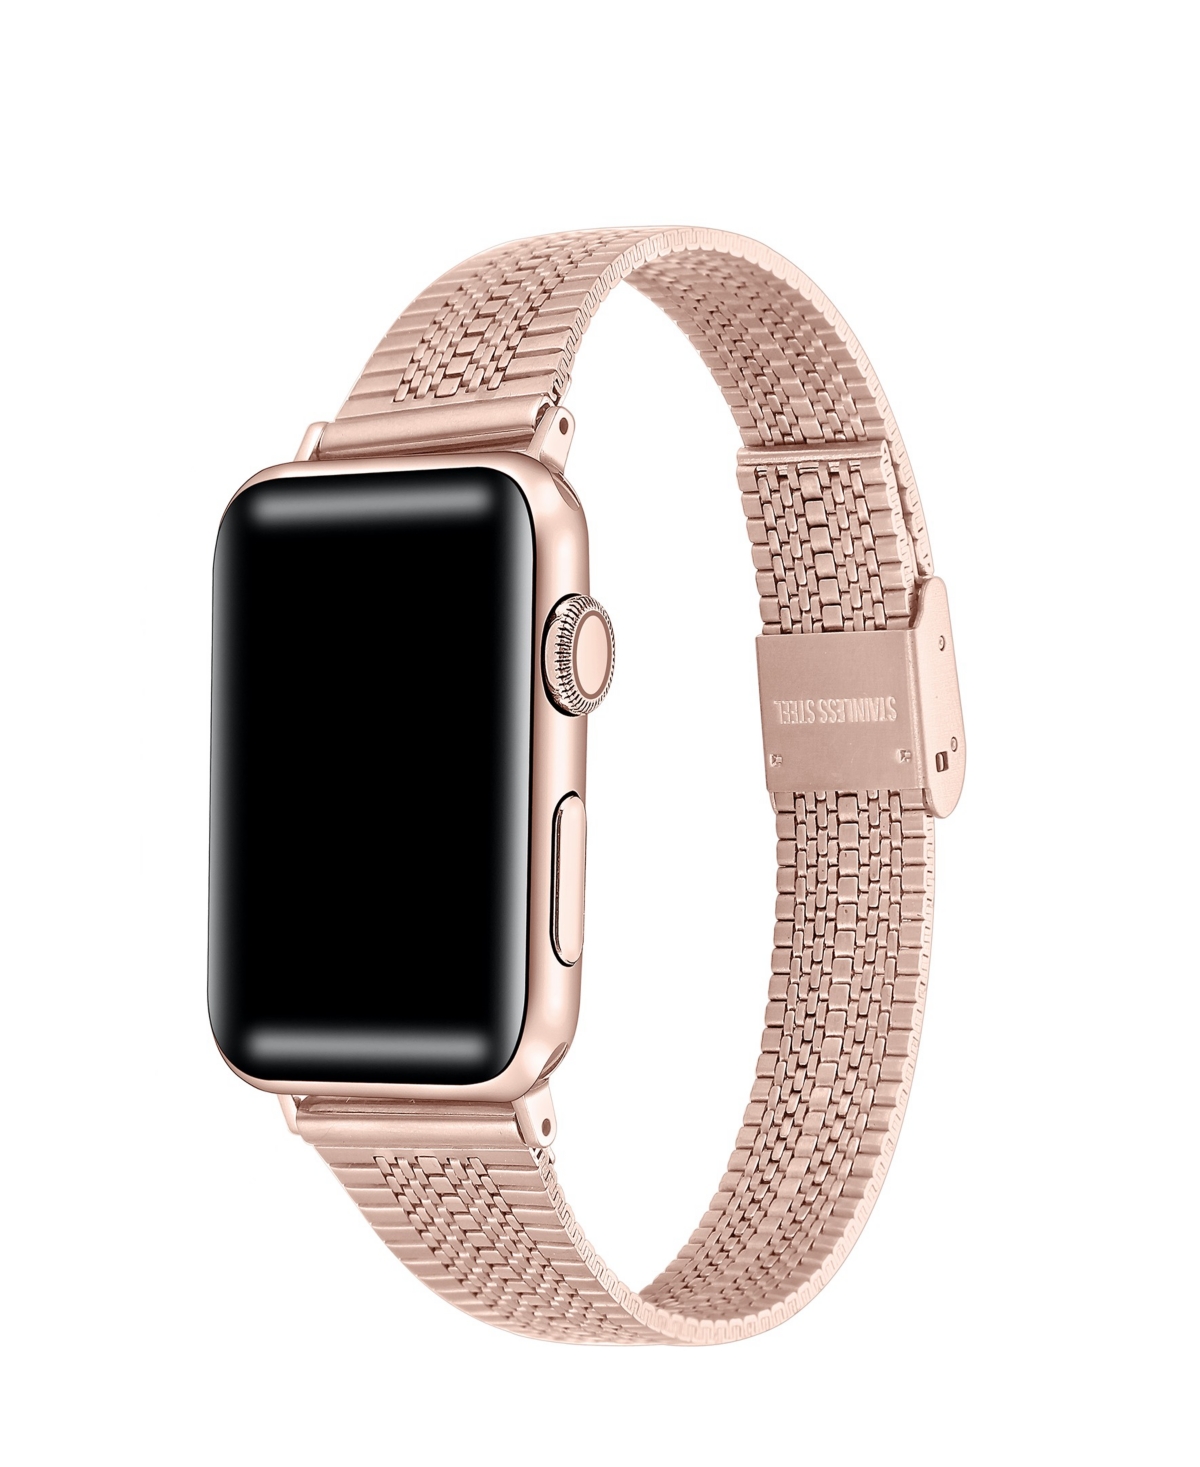 Unisex Eliza Stainless Steel Bicolor Band for Apple Watch Size- 38mm, 40mm, 41mm - Silver, Black